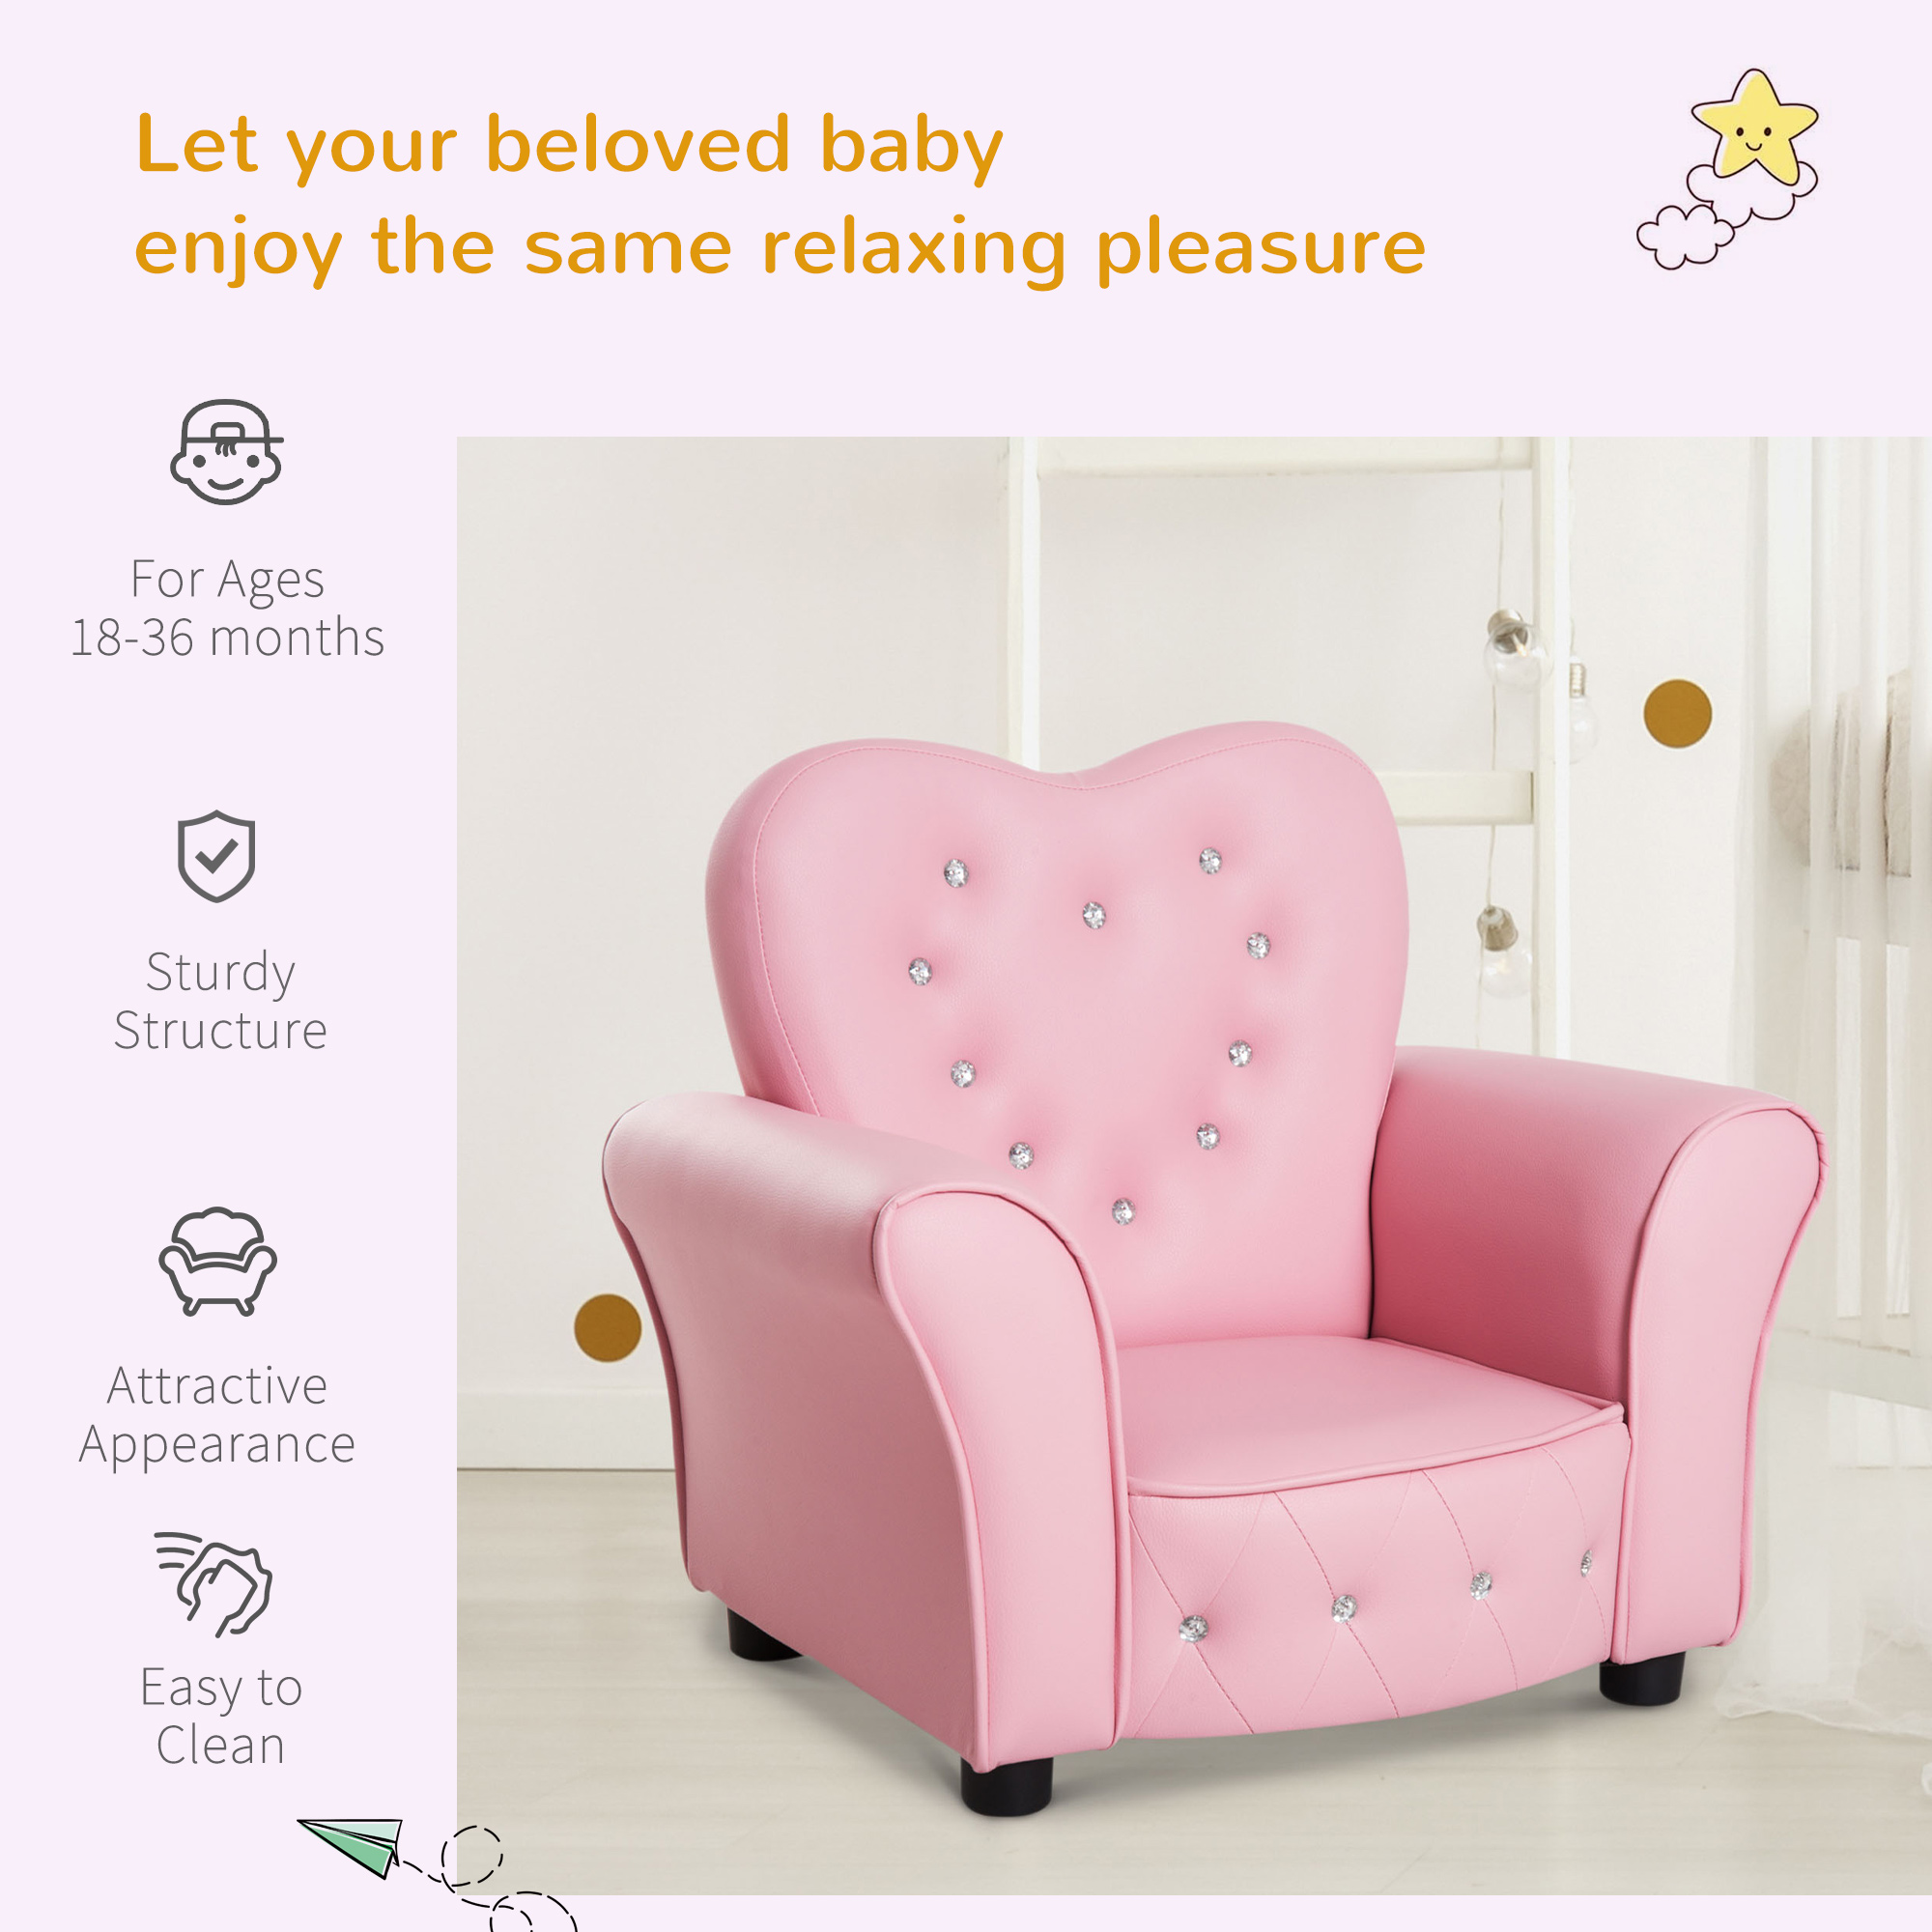 Qaba Kids Sofa Toddler Tufted Upholstered Sofa Chair Princess Couch Furniture with Diamond Decoration for Preschool Child, Pink - image 7 of 9